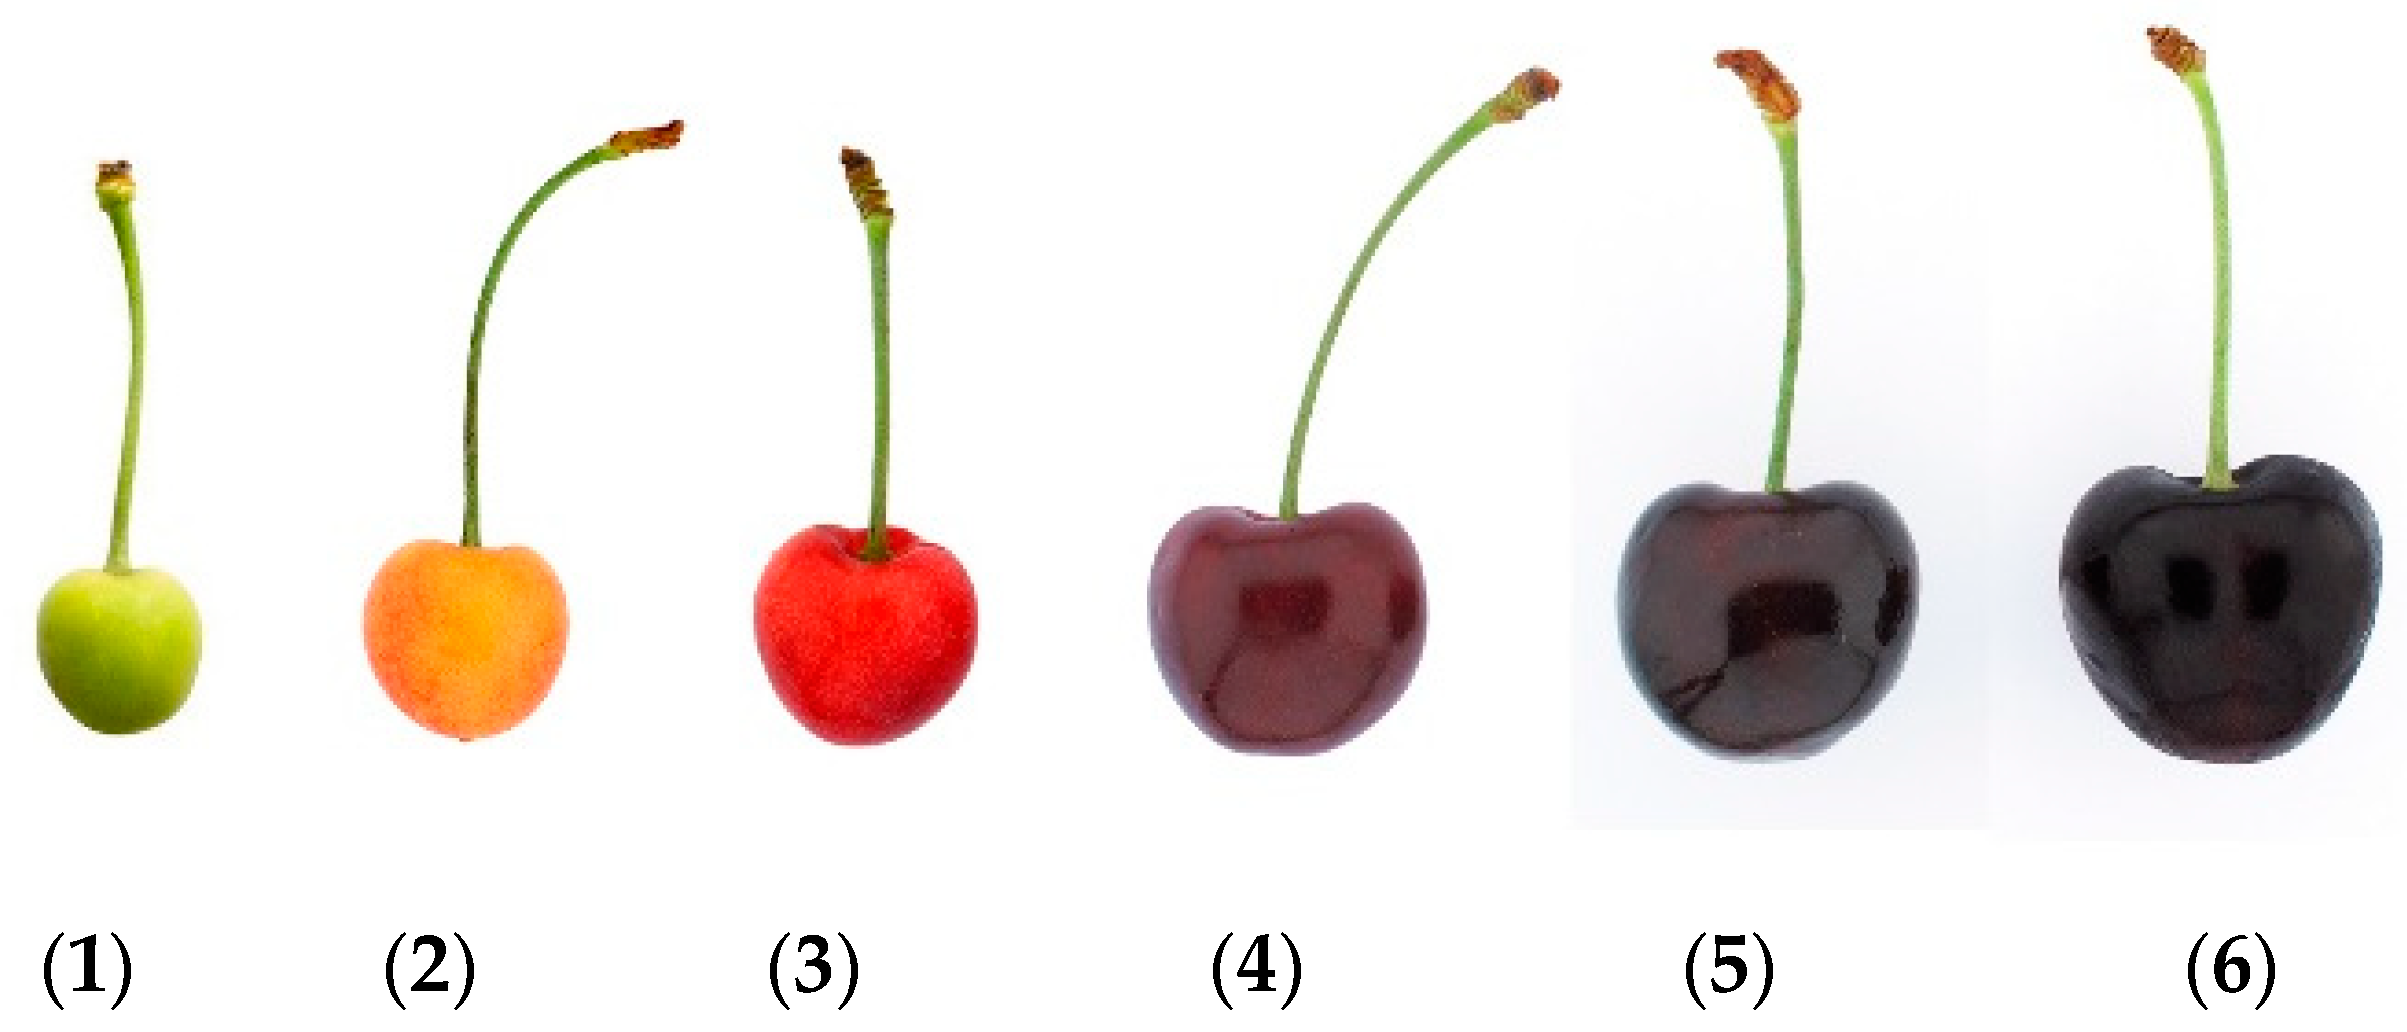 Compound Interest: The chemistry of sweet and sour cherries